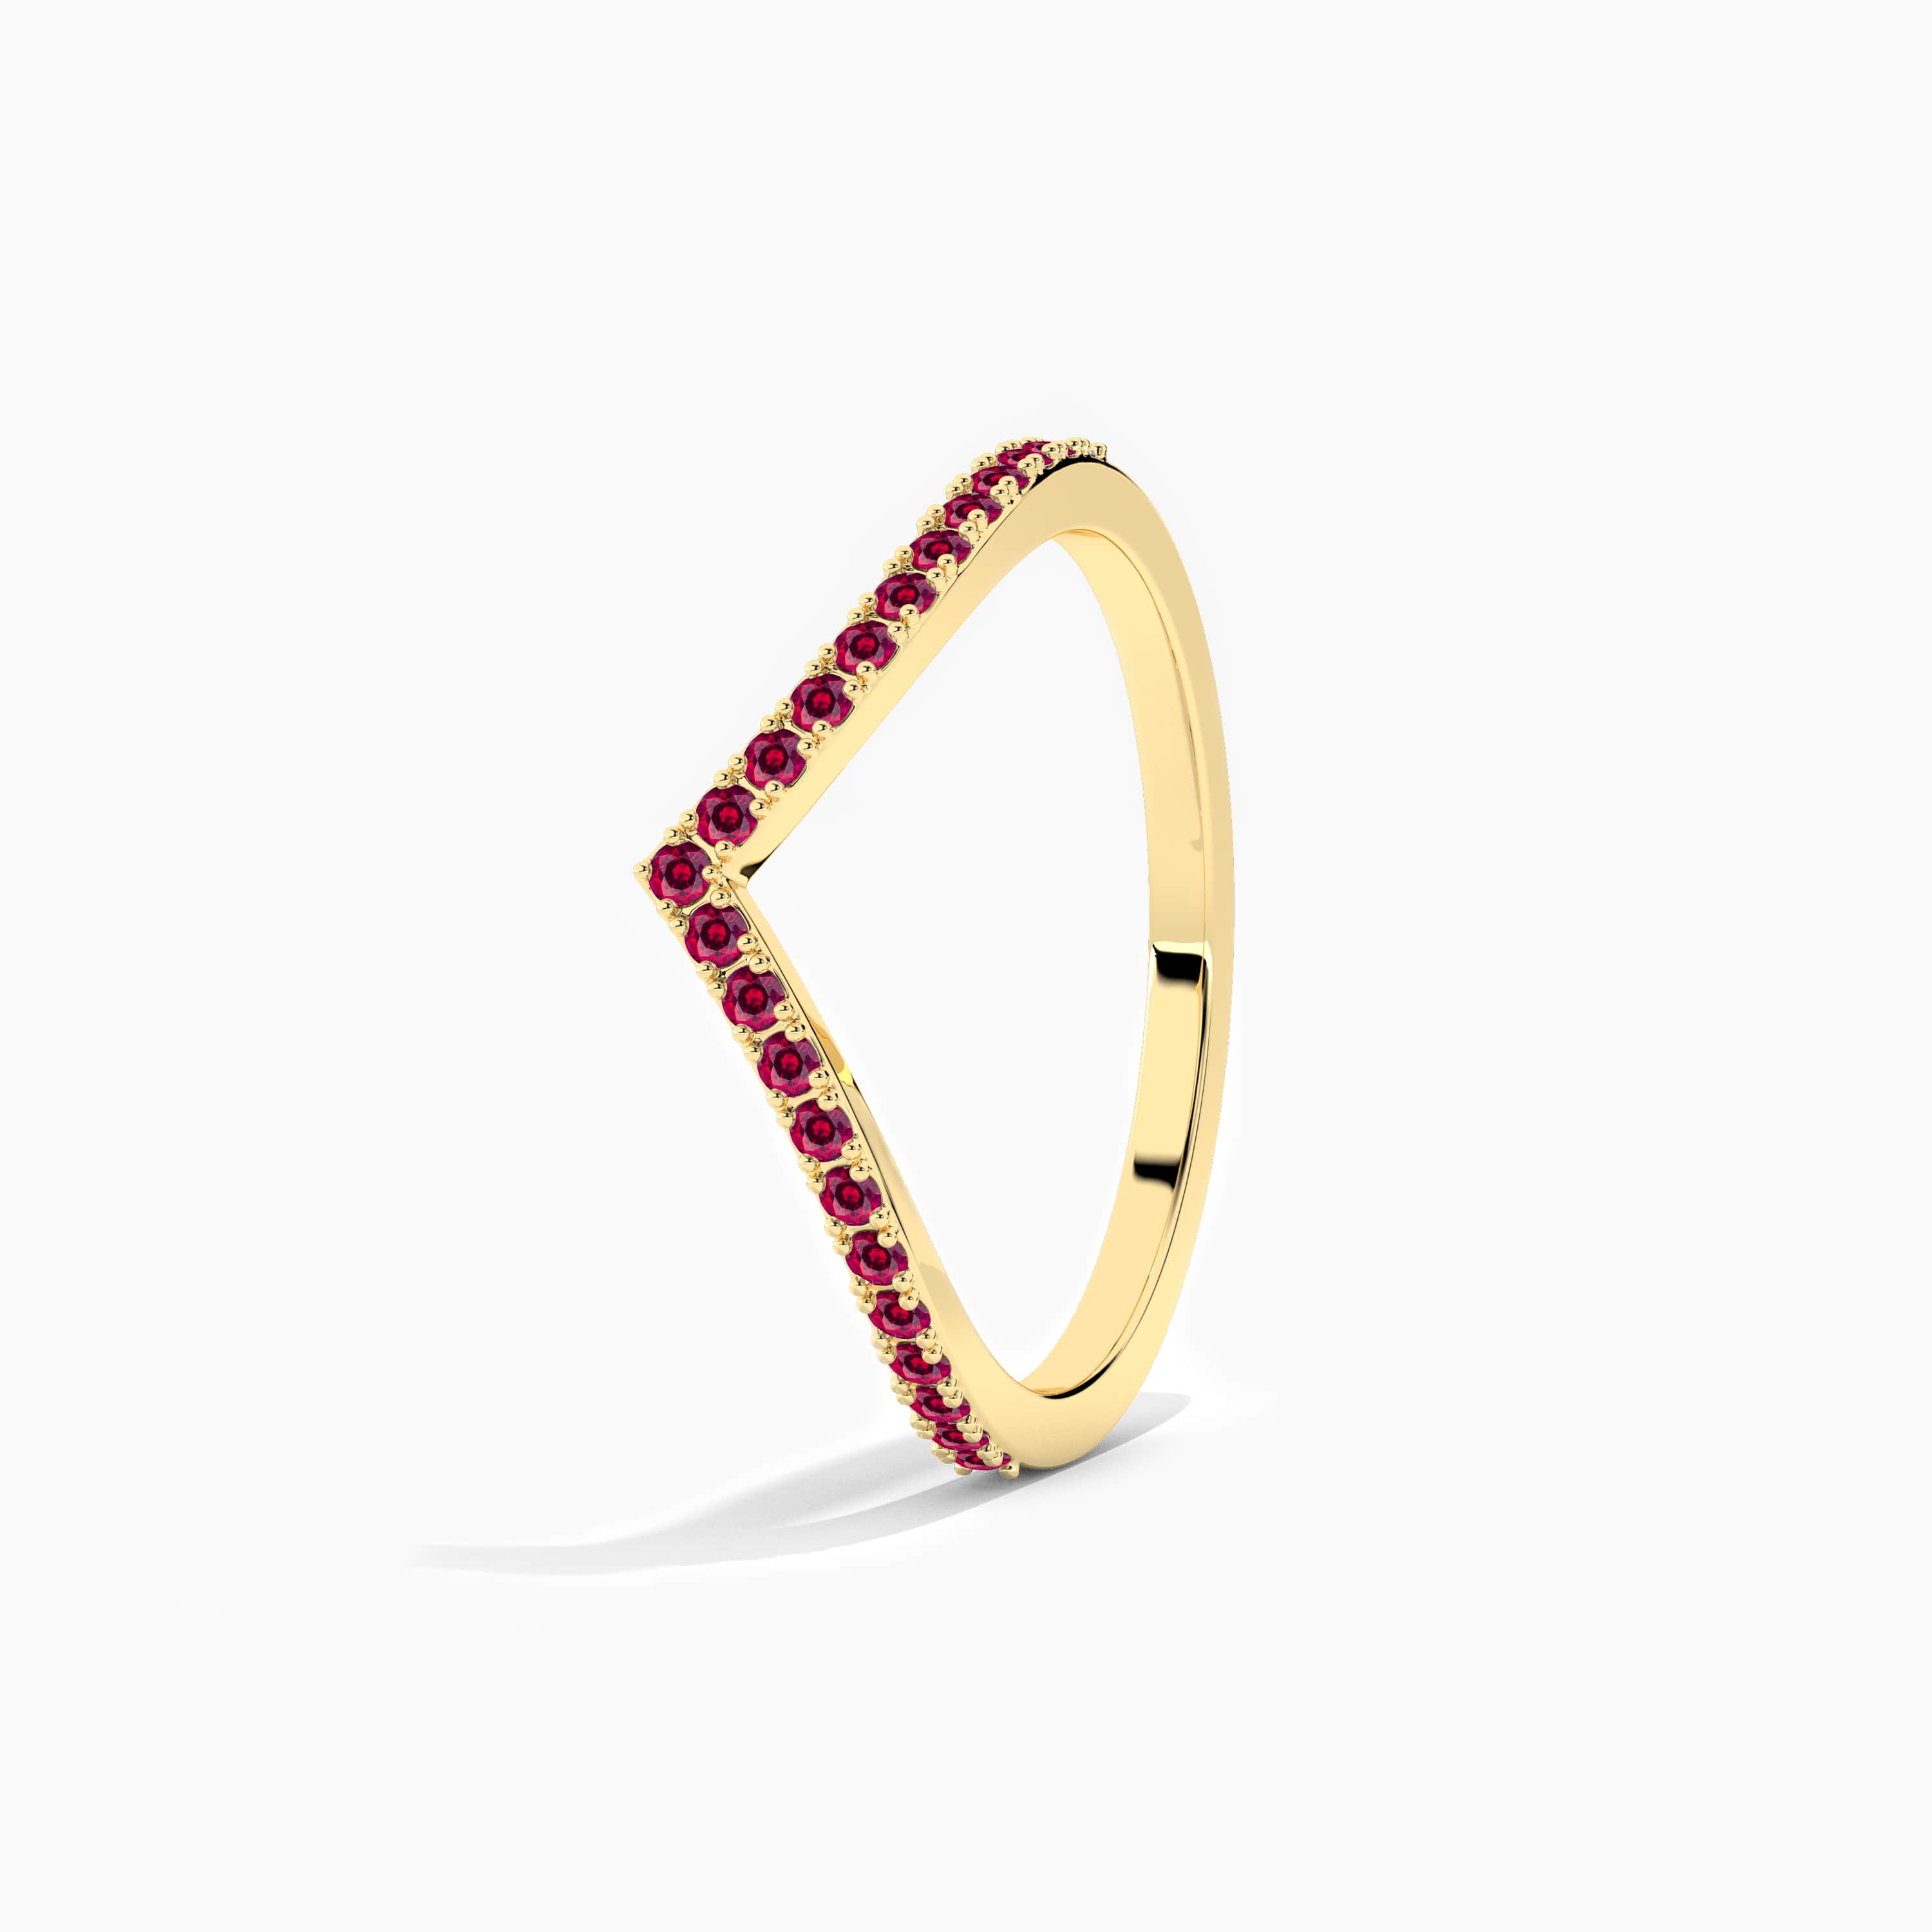 Ruby diamond curved ring in yellow gold 